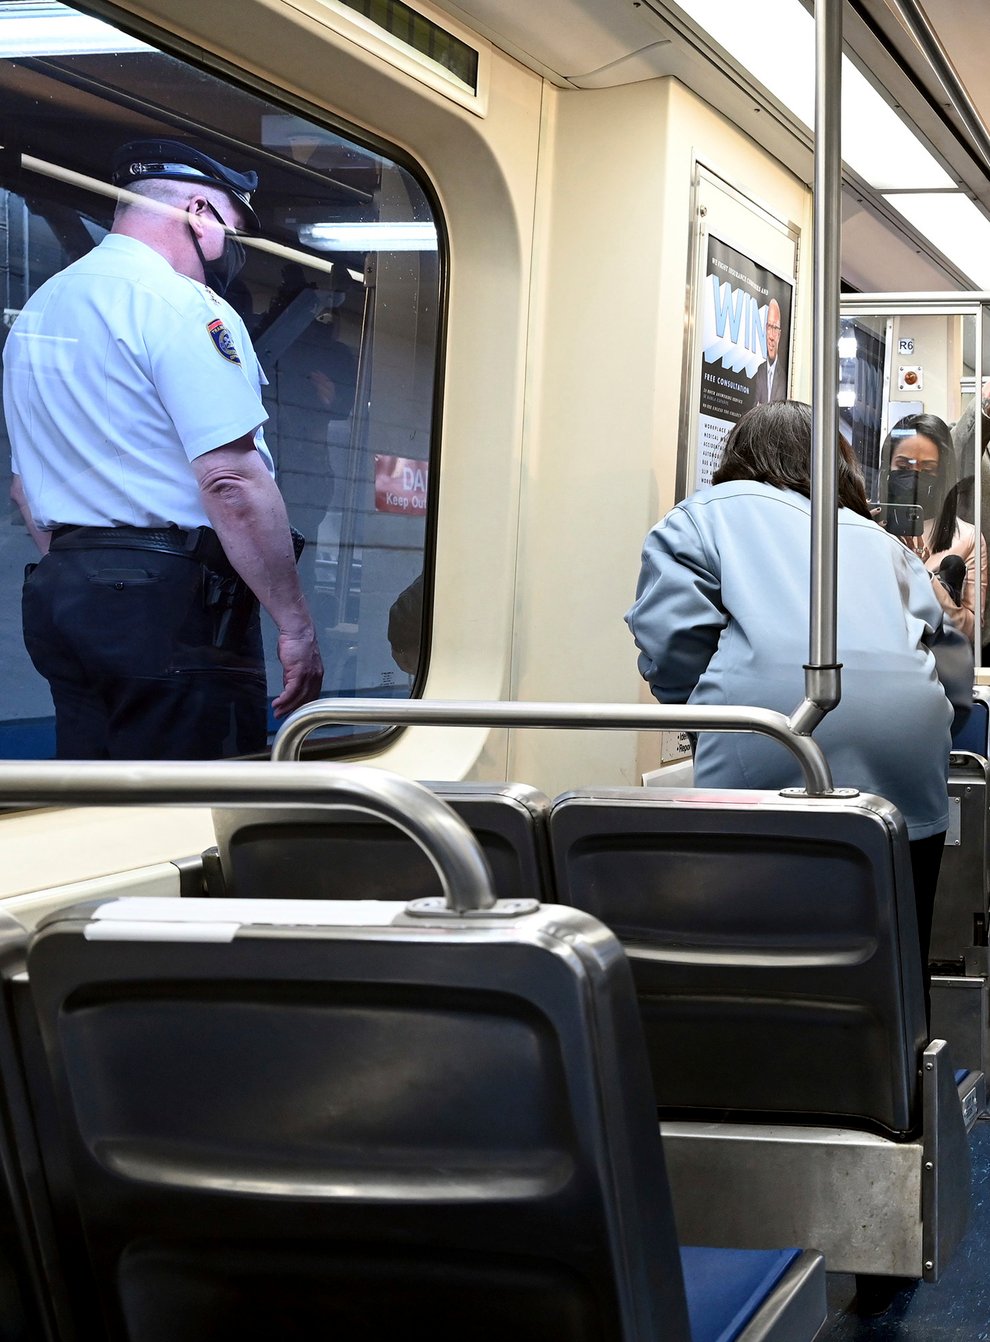 Septa Transit Police Chief Thomas Nestel III, seen through window at left, stands by following a news conference on an El platform (Tom Gralish/AP)